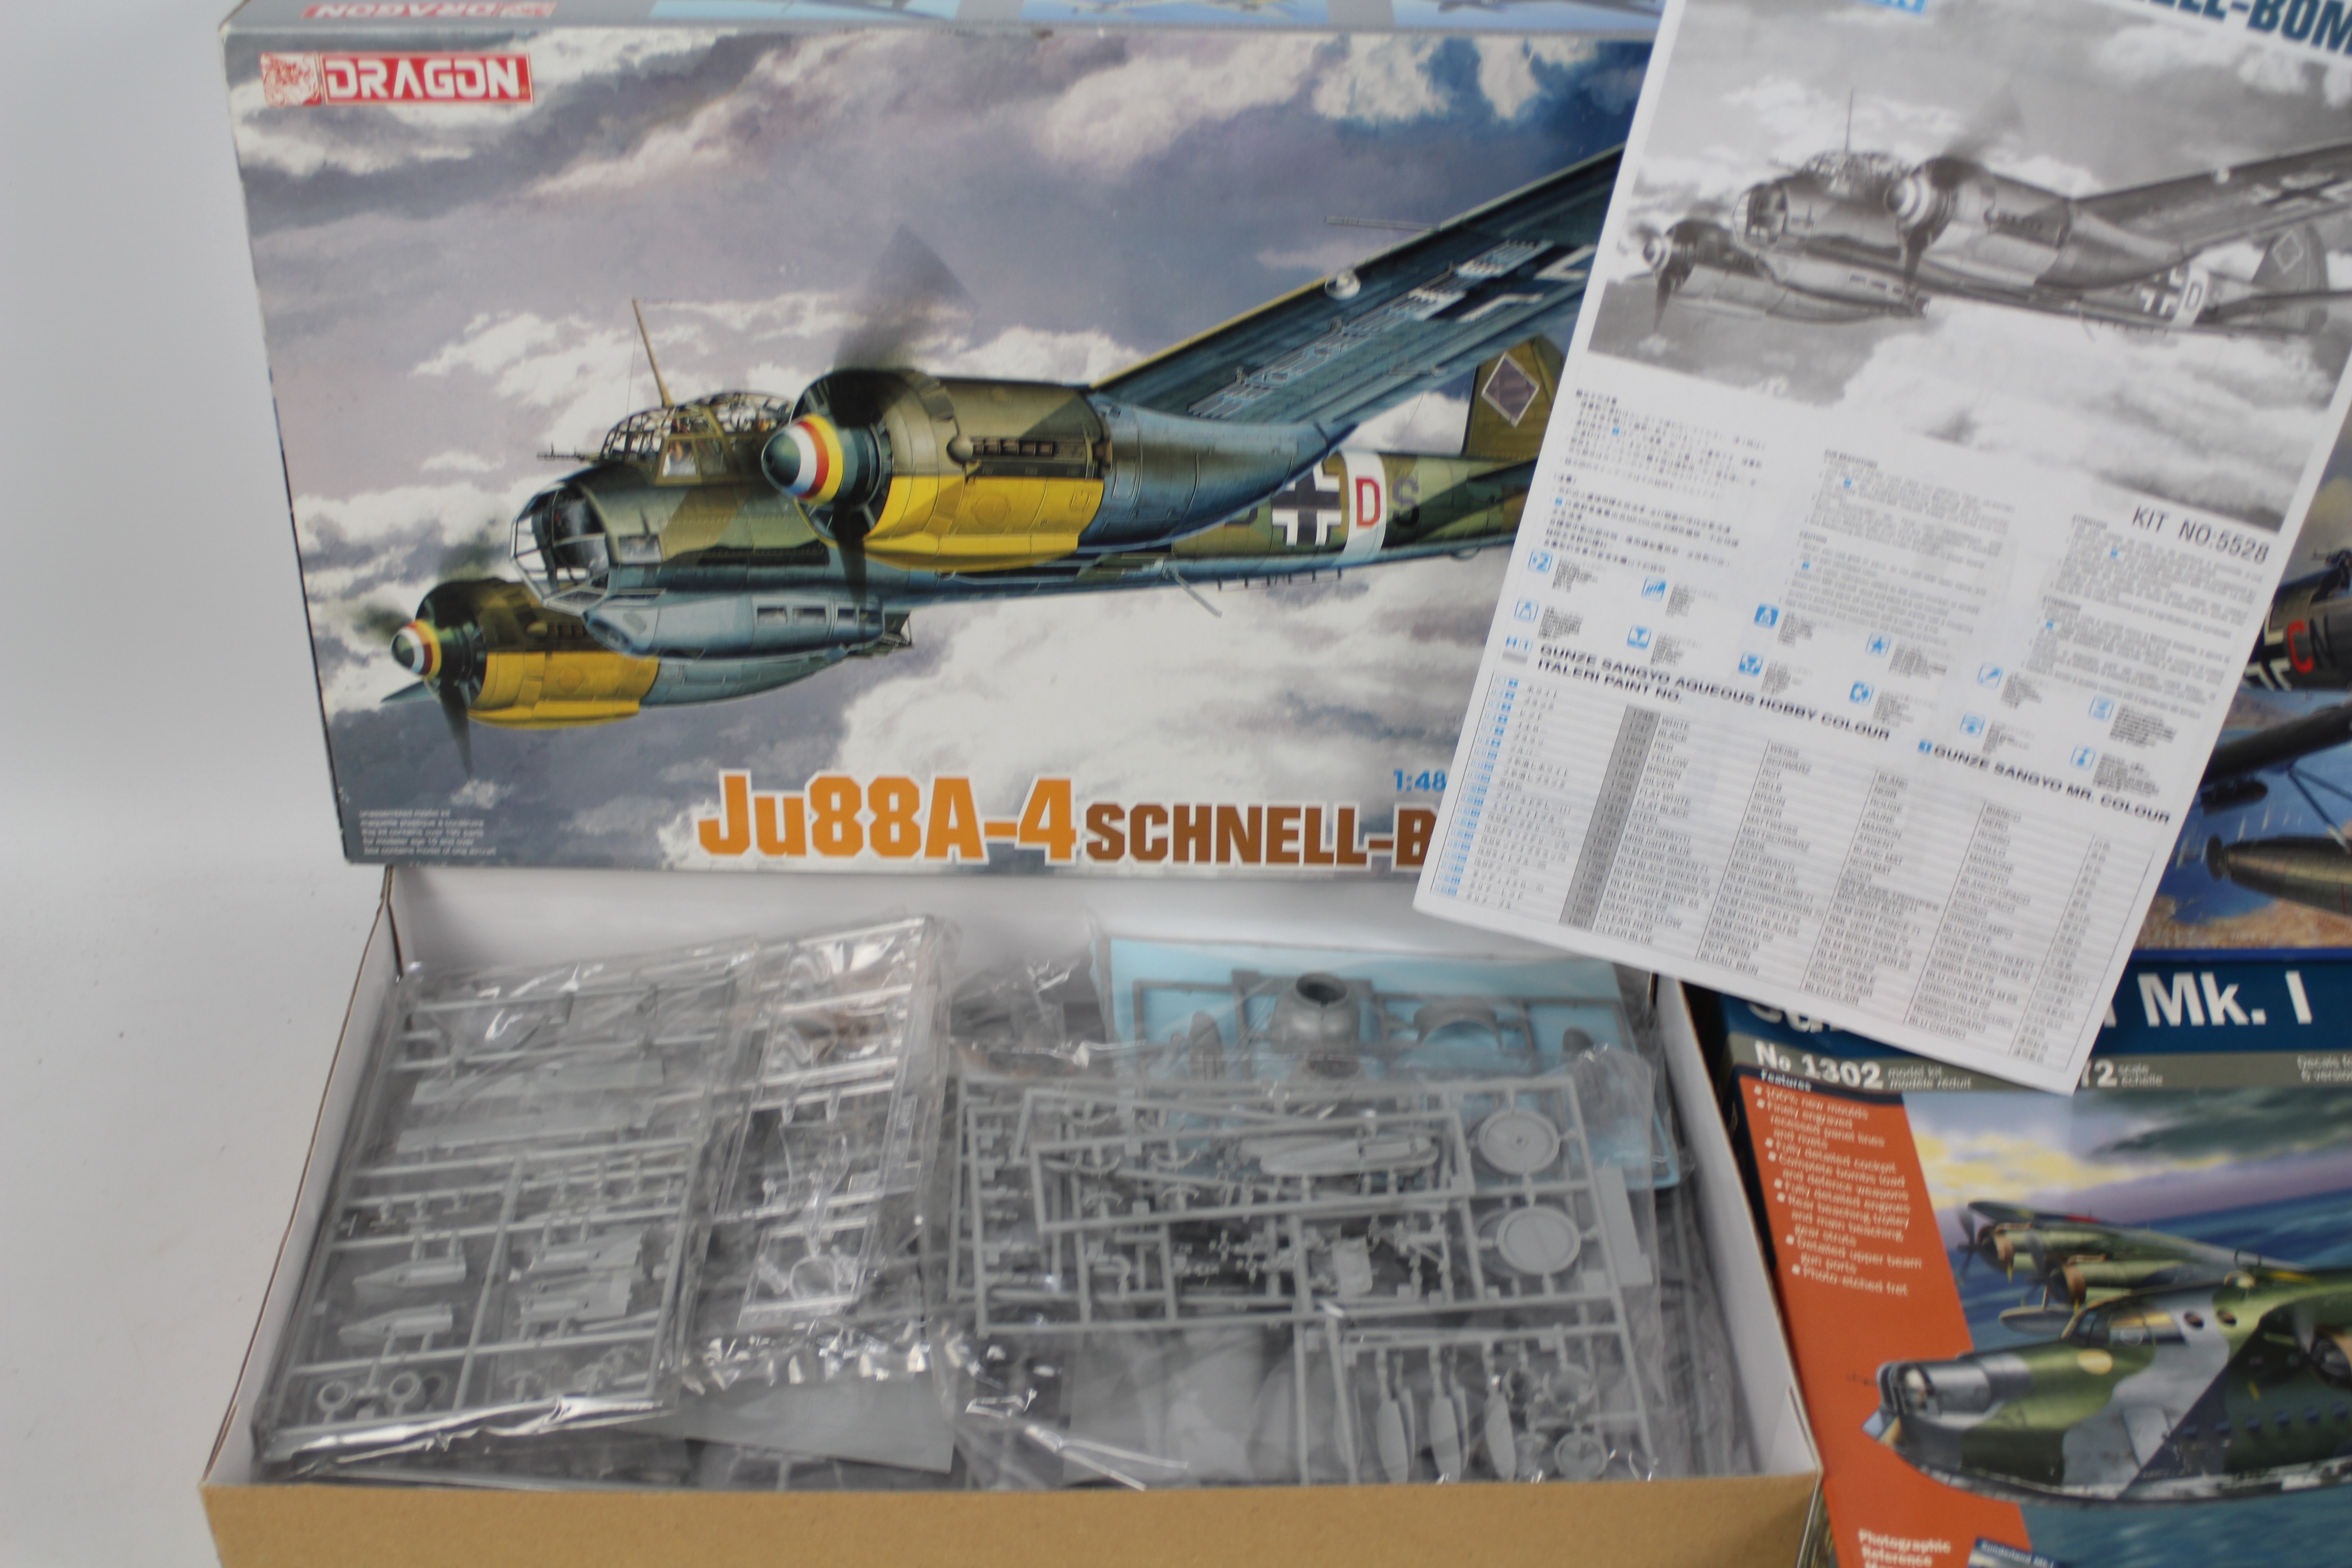 Italeri - Revell - Dragon - Three boxed military aircraft plastic model kits in various scales. - Image 4 of 4